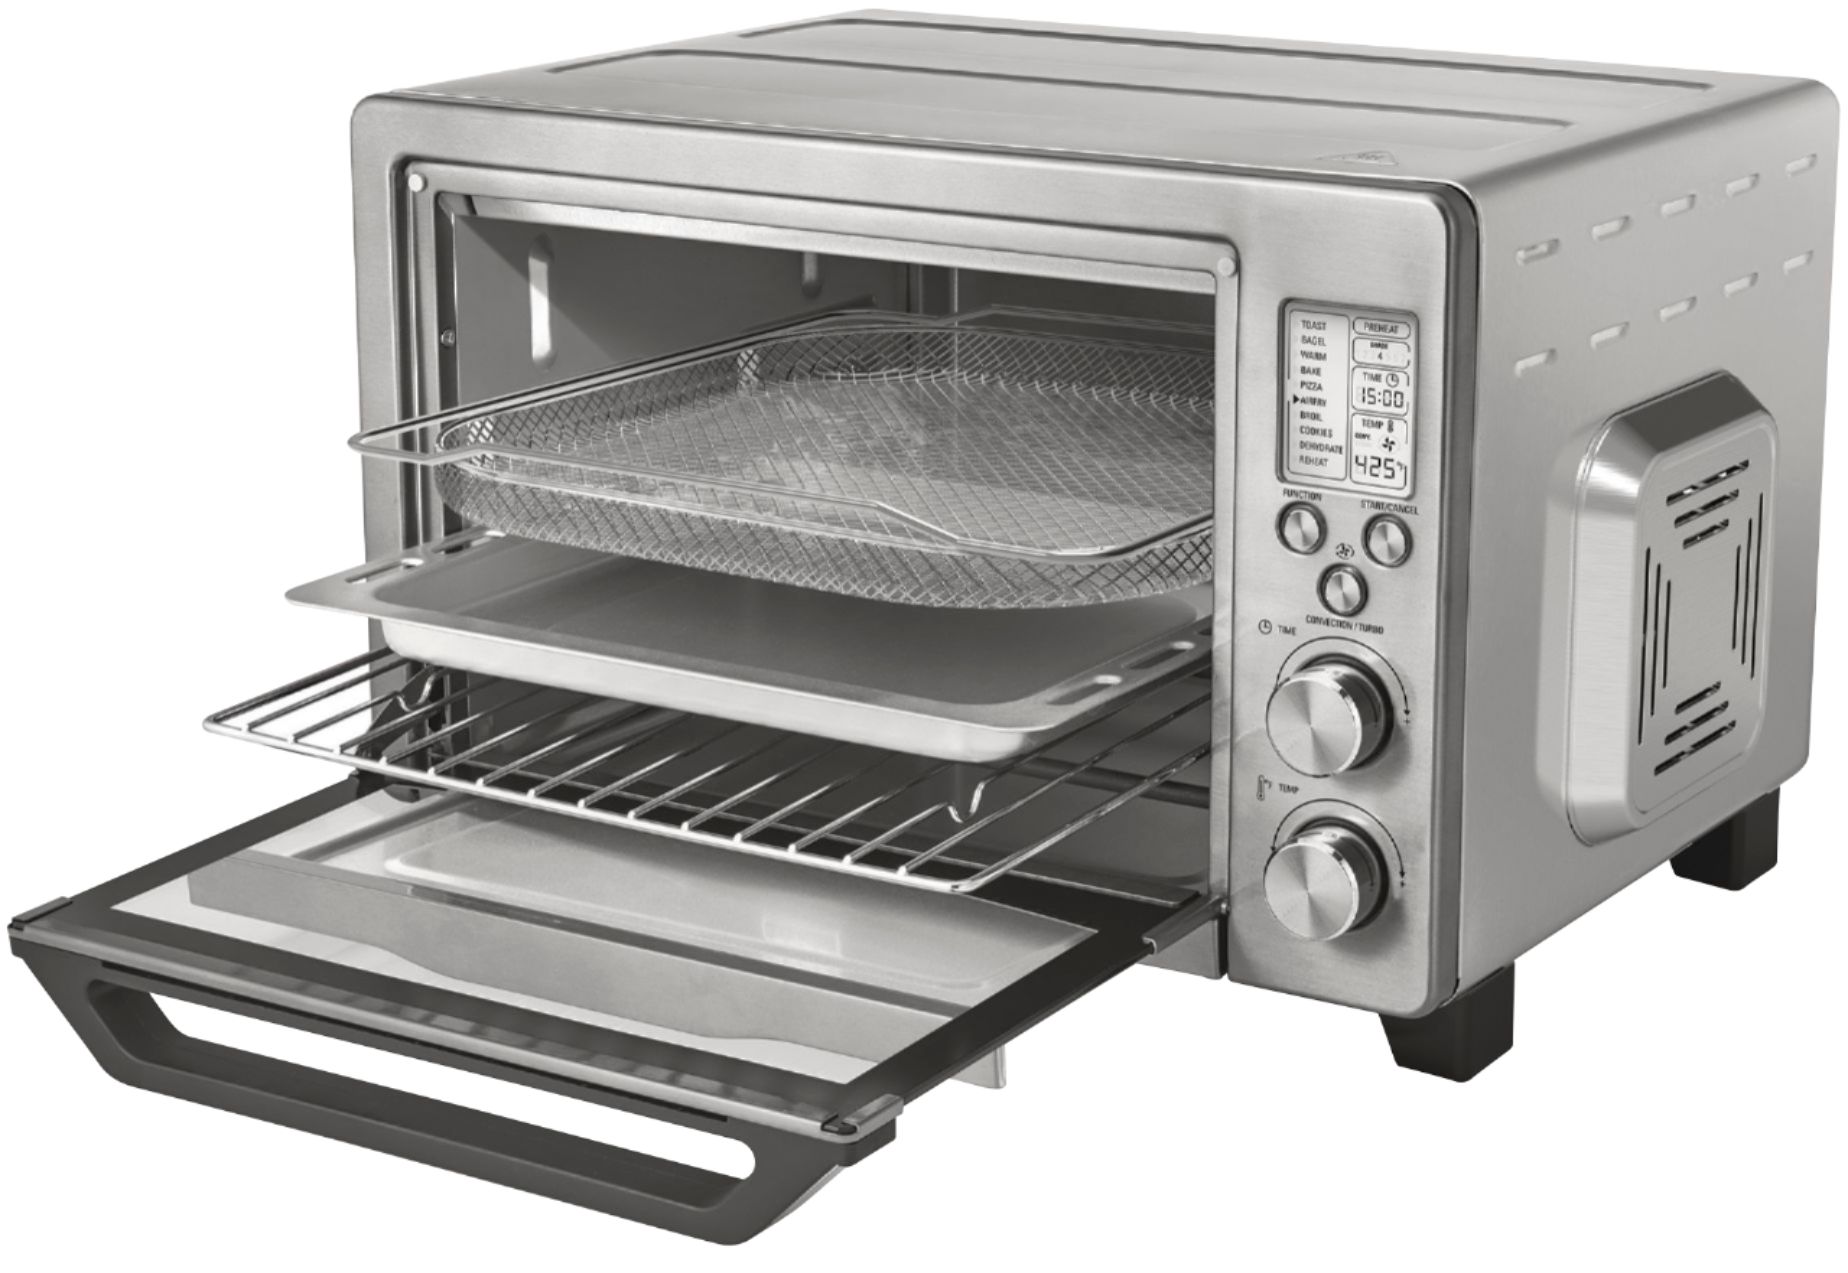 Russell Hobbs 220 volts Toaster Oven Air Fryer Convection Oven Bake Grill  Stainless Steel Stainless Steel 220v 240 volt 1500 Watts 26095